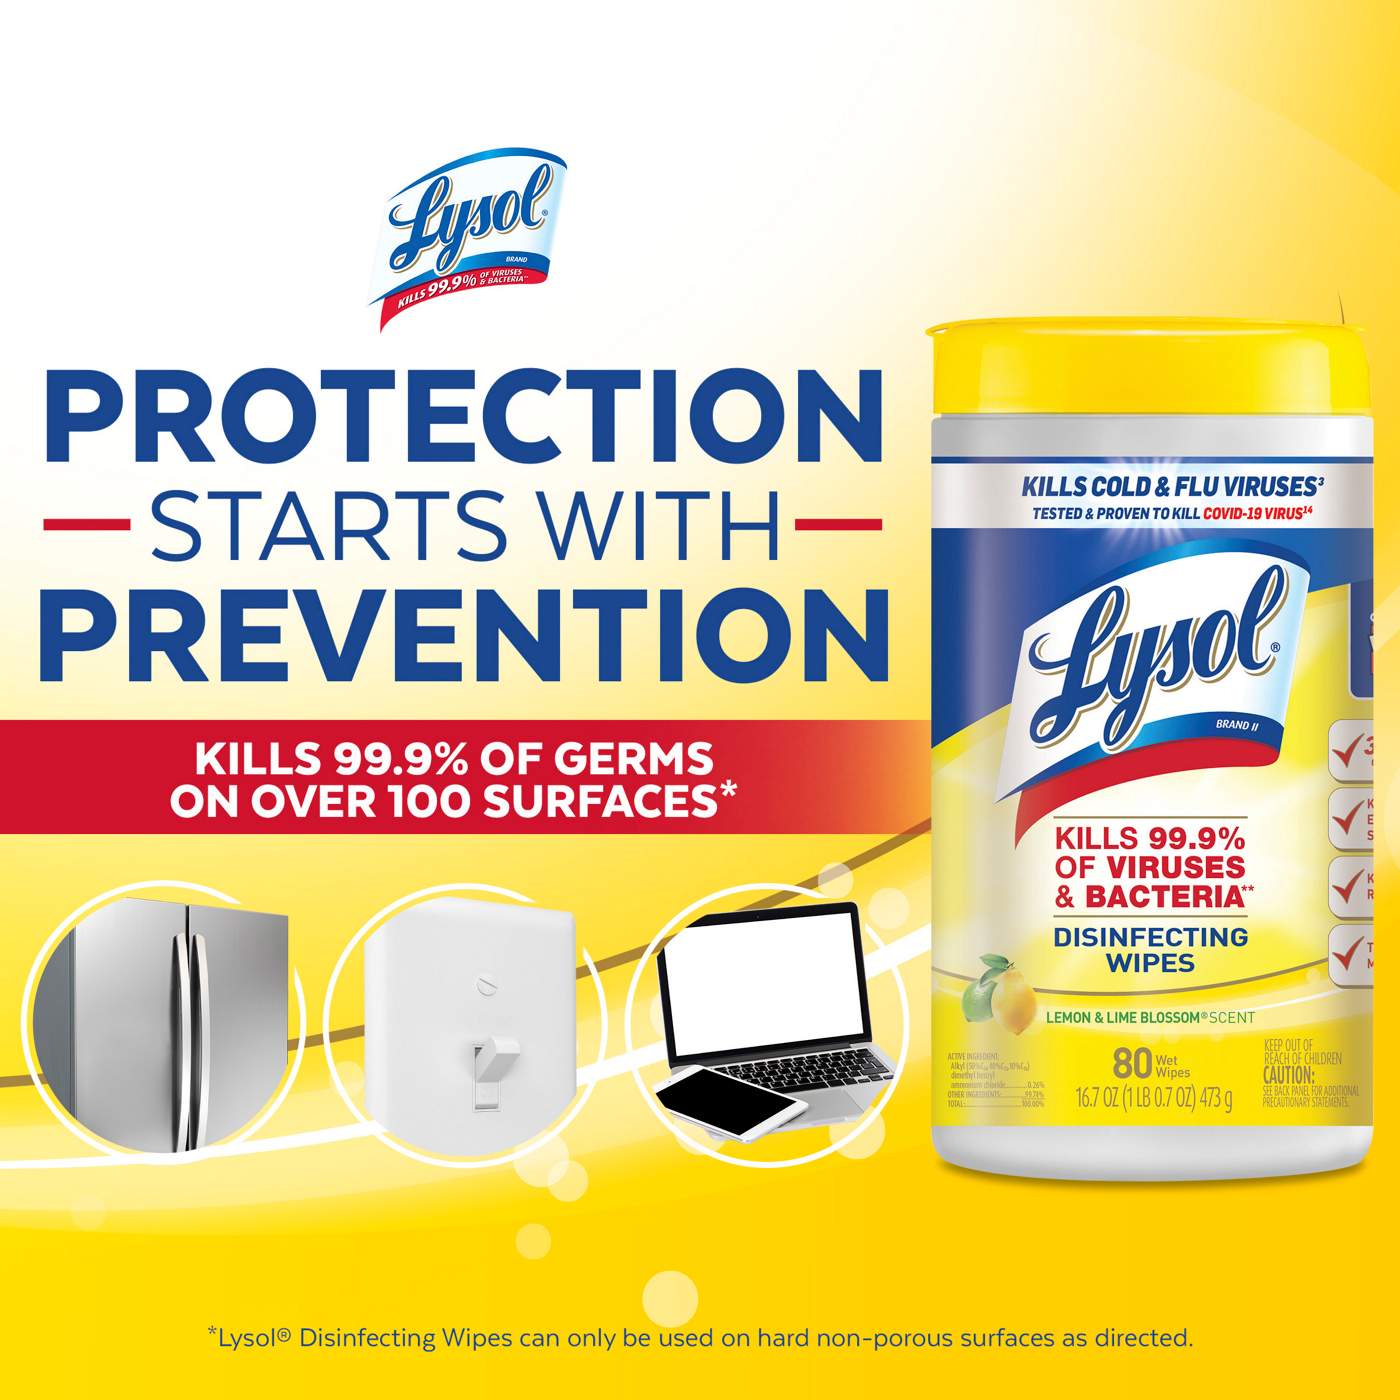 Lysol Lemon & Lime Blossom Disinfecting Wipes; image 2 of 6